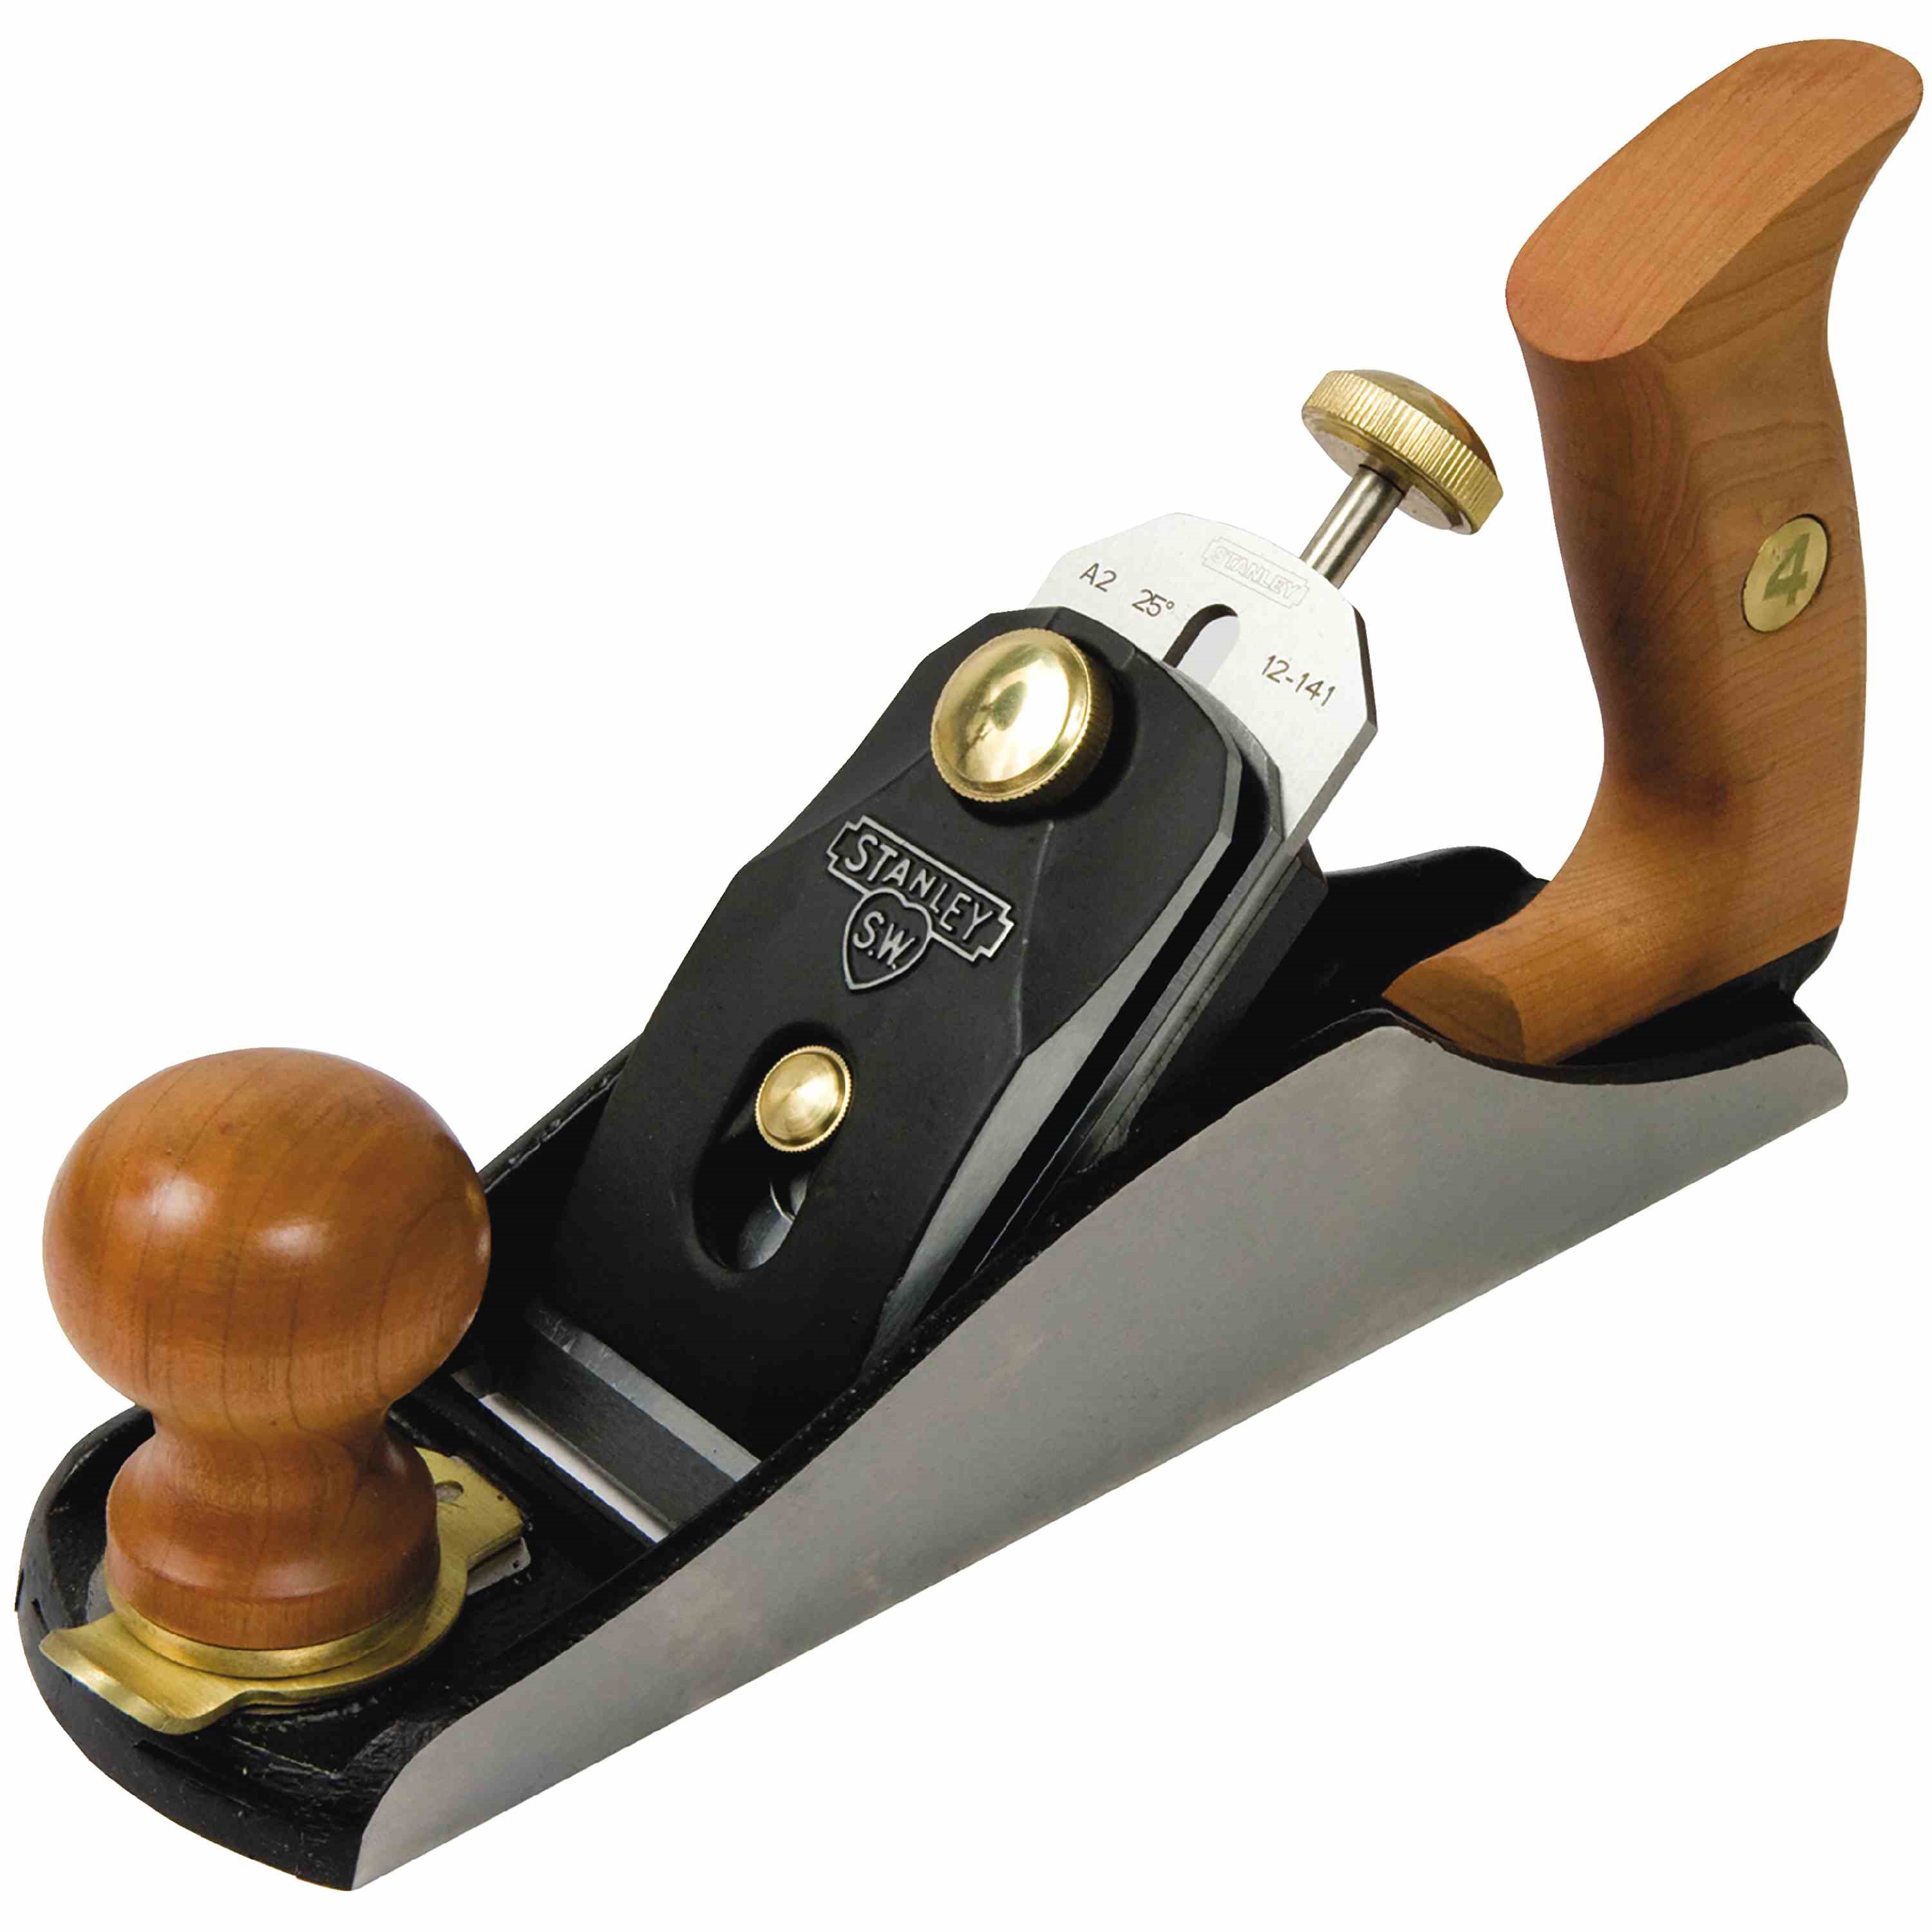 No. 4 Sweetheart™ Smoothing Bench Plane